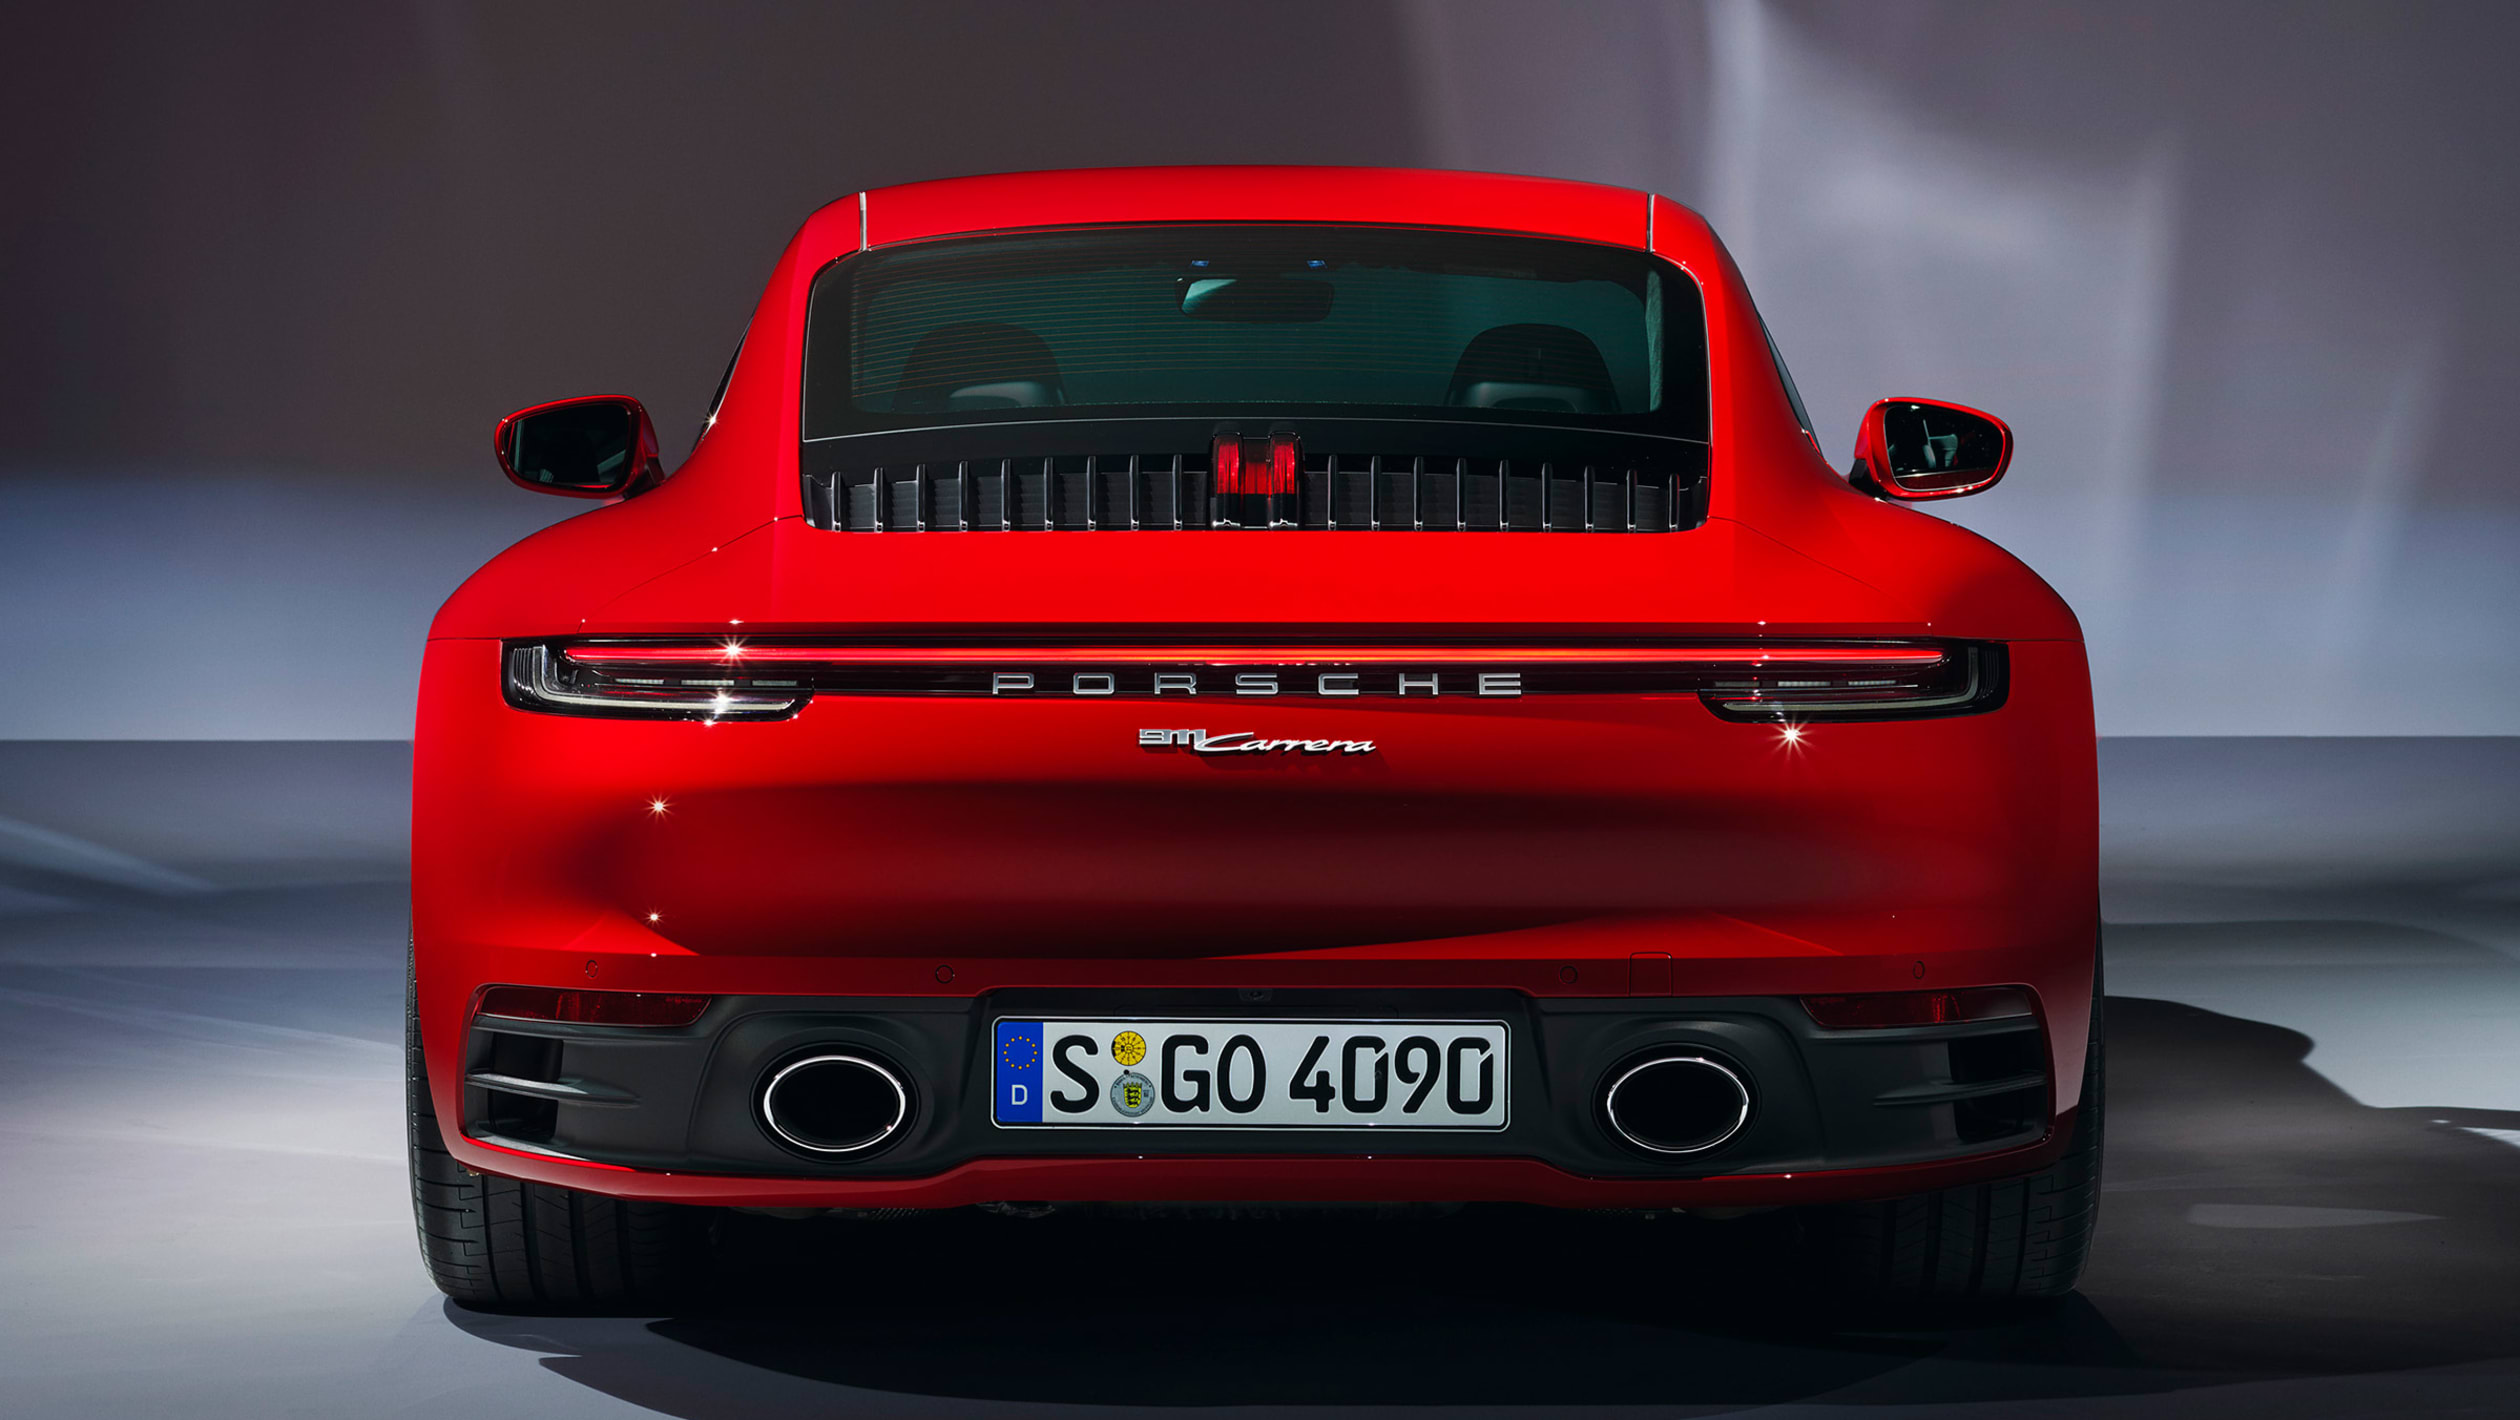 New entry-level Porsche 911 Carrera launched - pictures | Auto Express